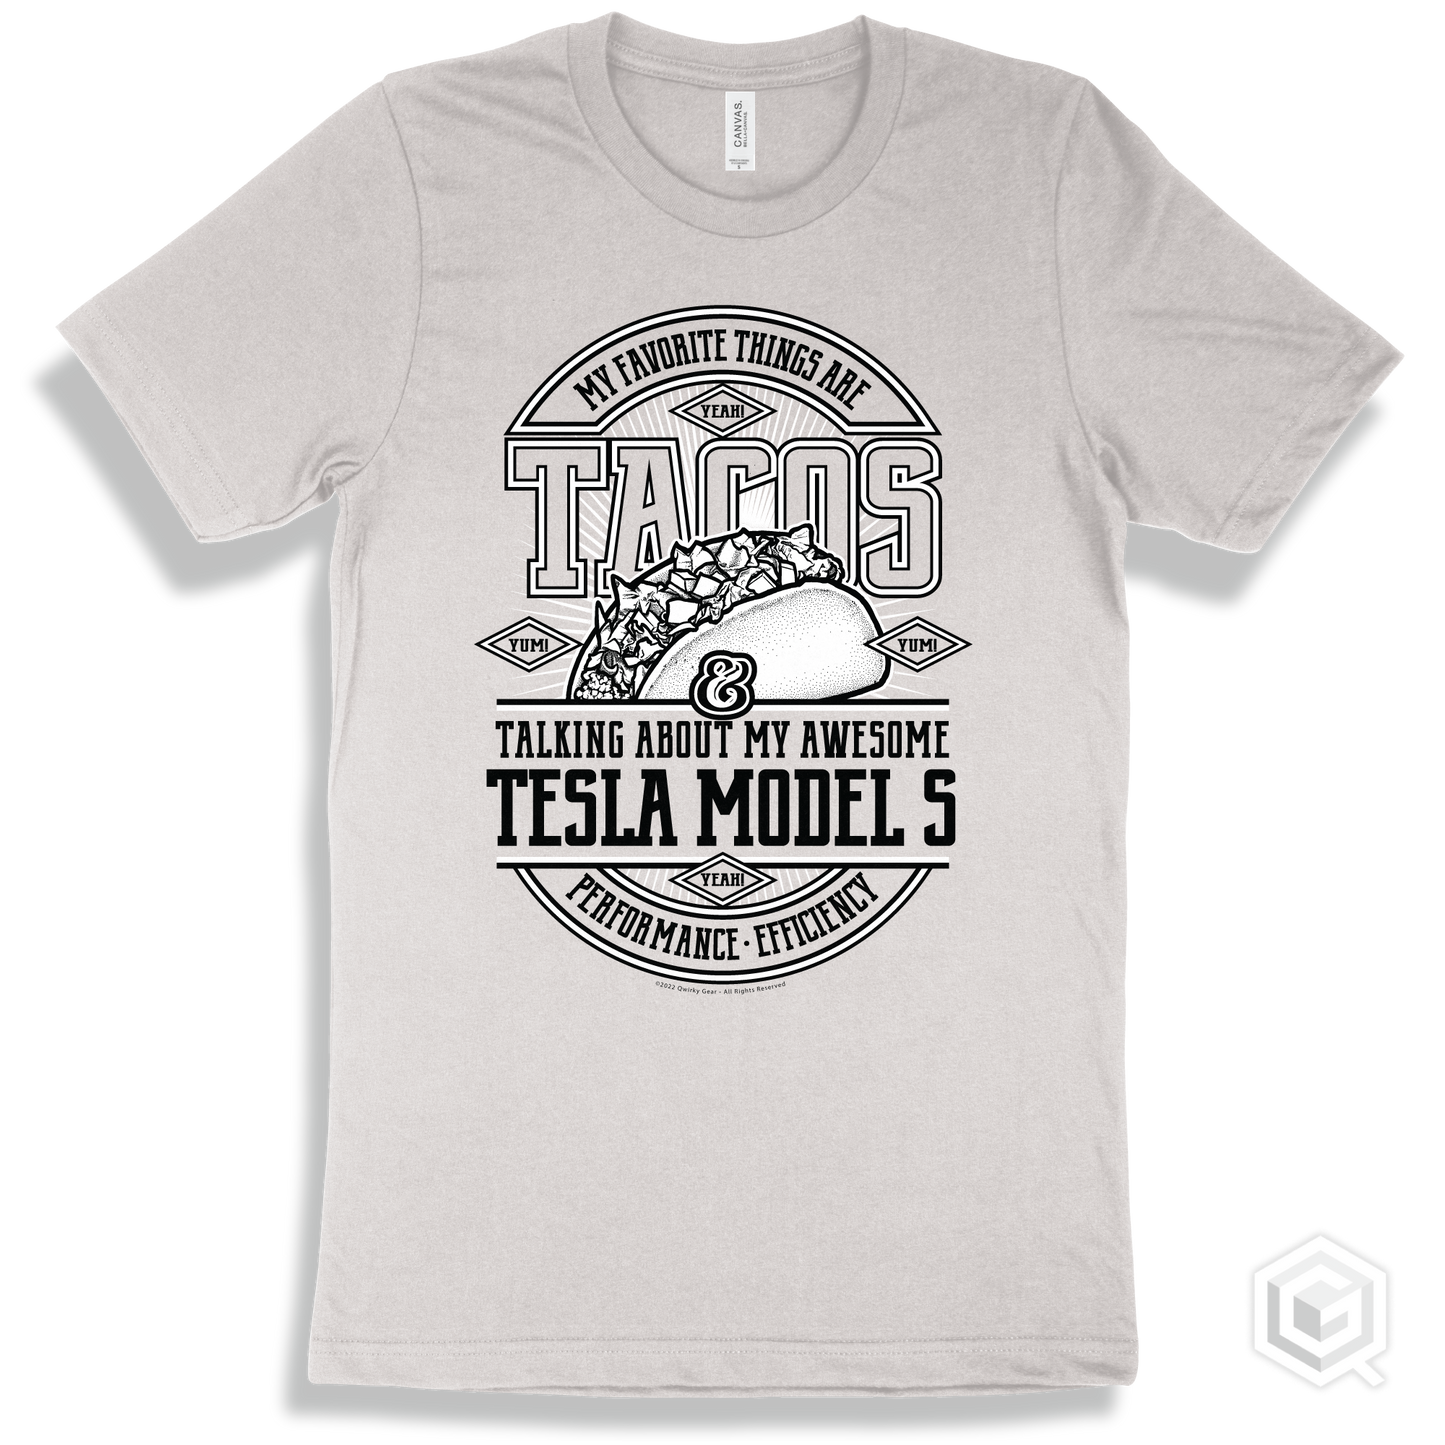 White T-shirt - My Favorite Things Are Tacos and Talking About My Awesome Tesla Model S Design